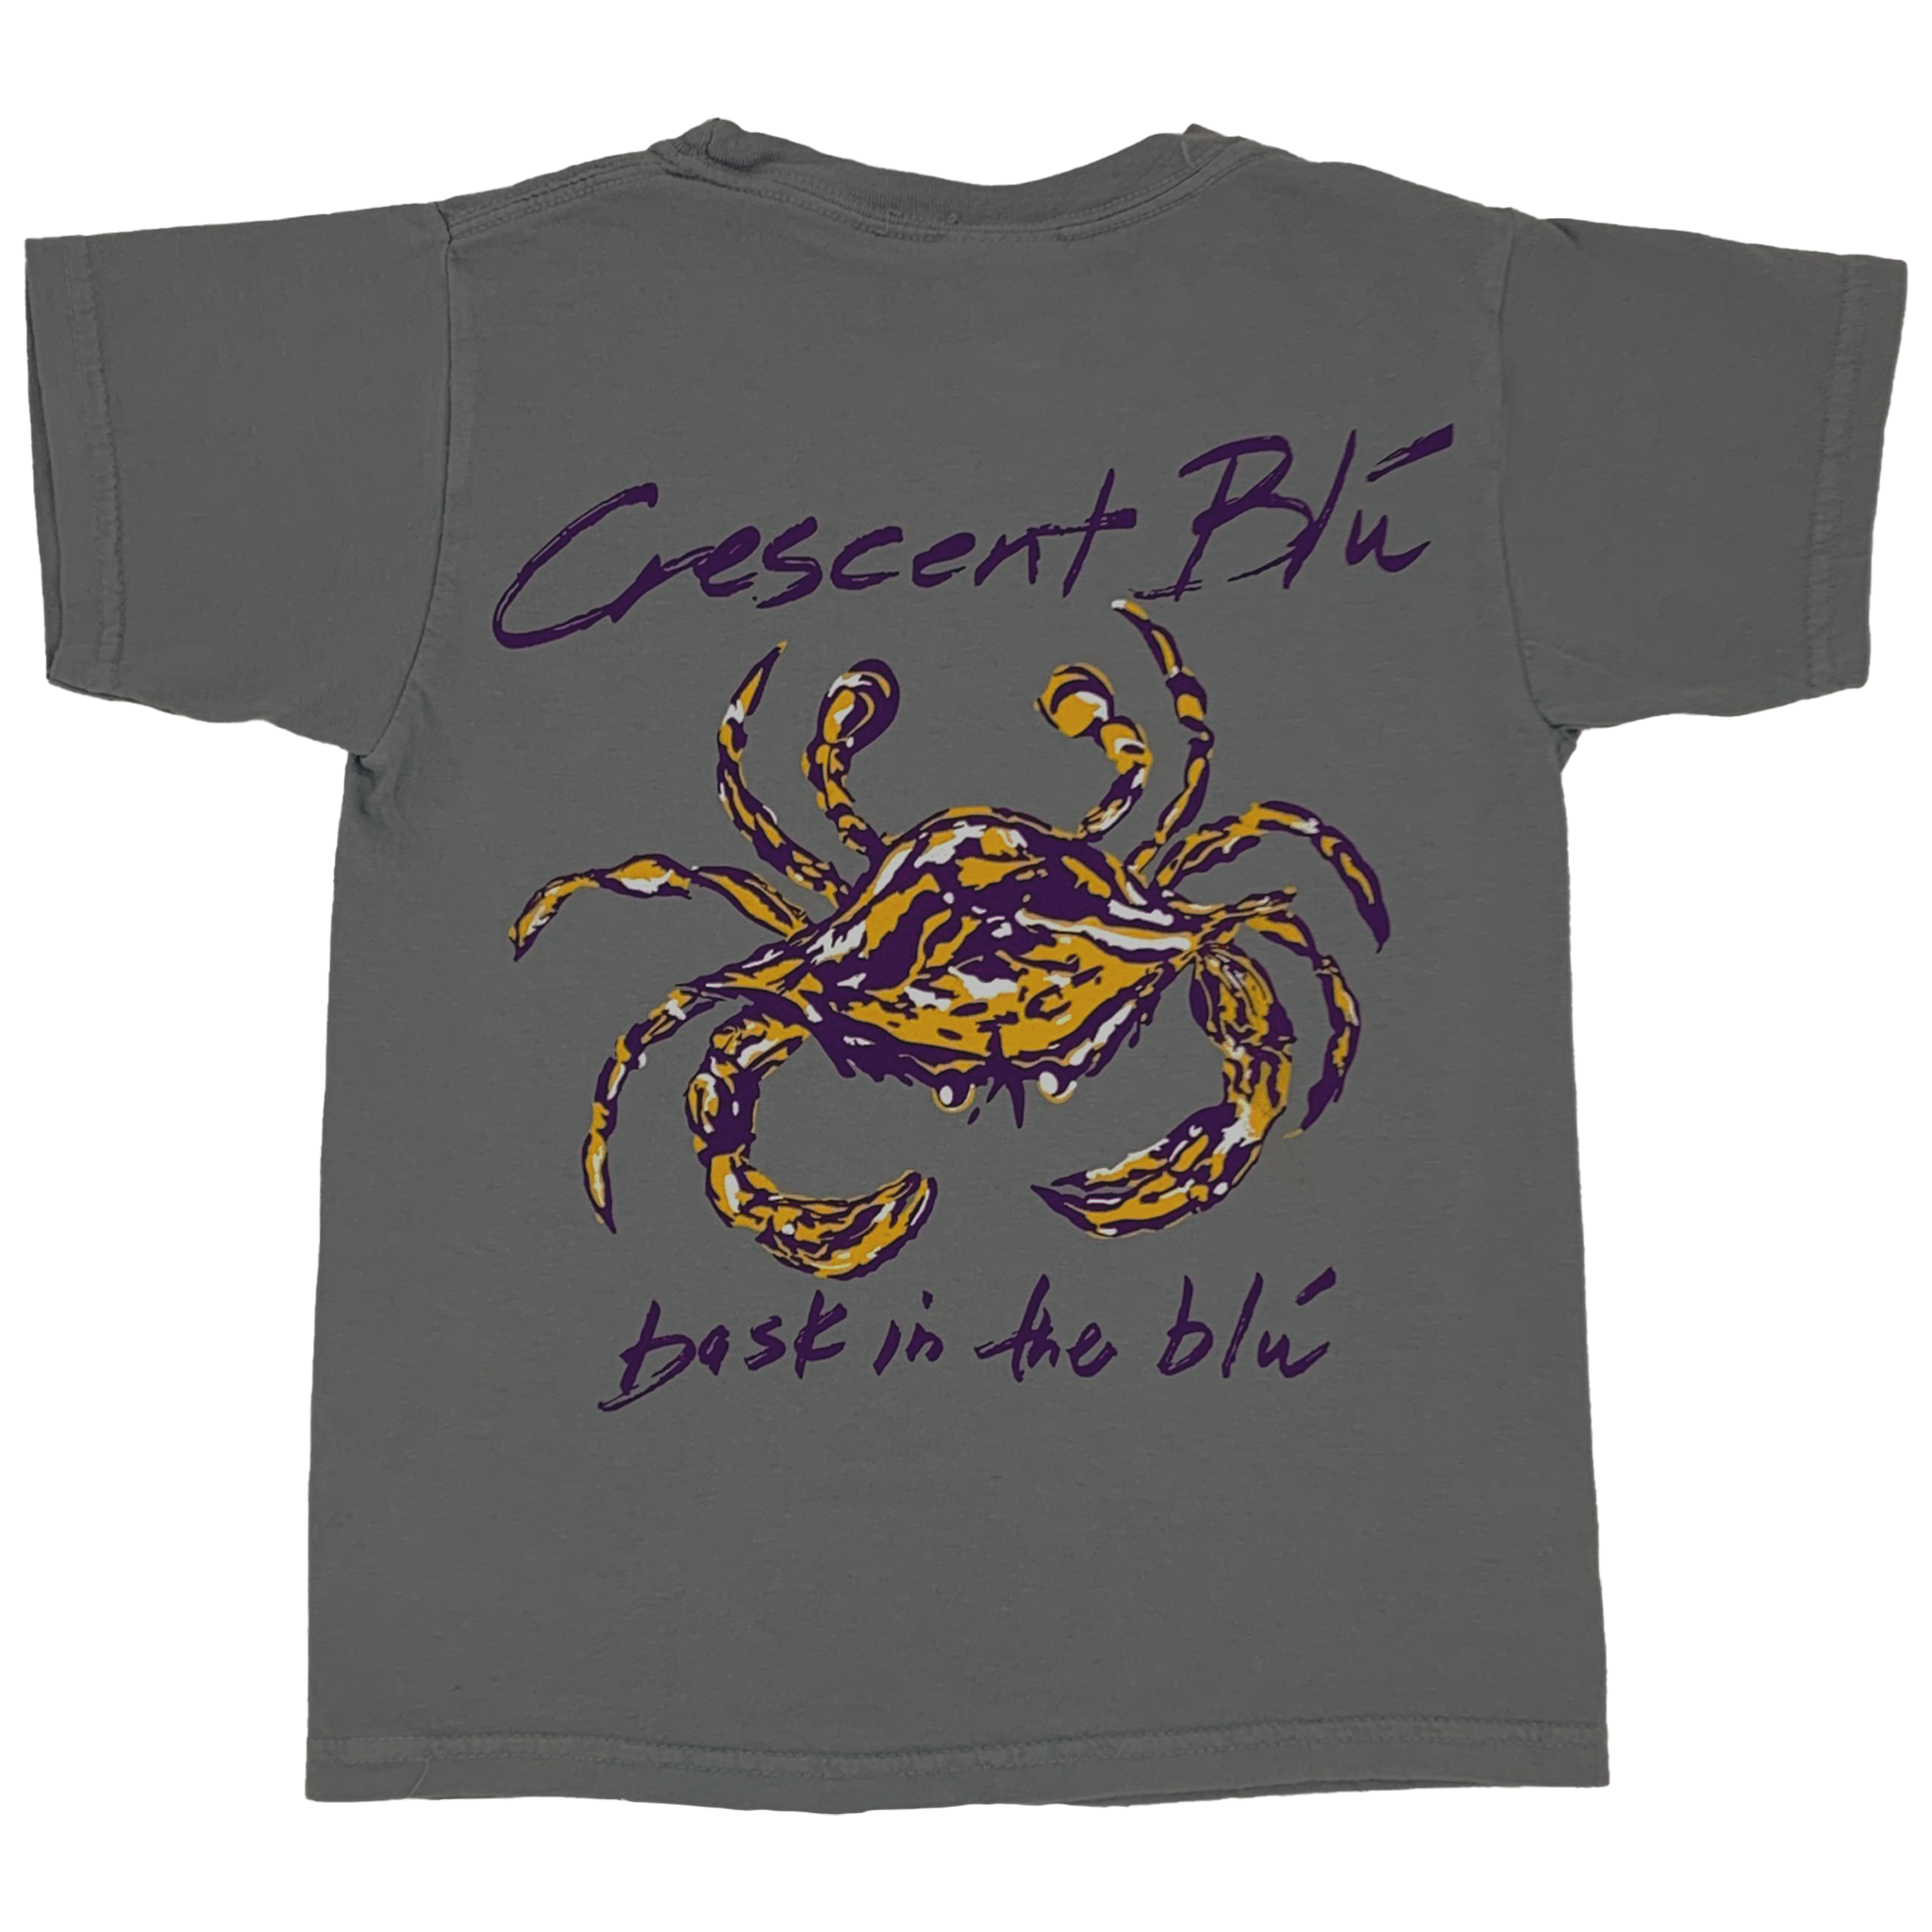 Short sleeve child tee in grey with purple writing that says, Crescent Blu  on the upper back and "bask in the blu" is written on the bottom. A purple, gold and white crab is centered on the back of the shirt. 